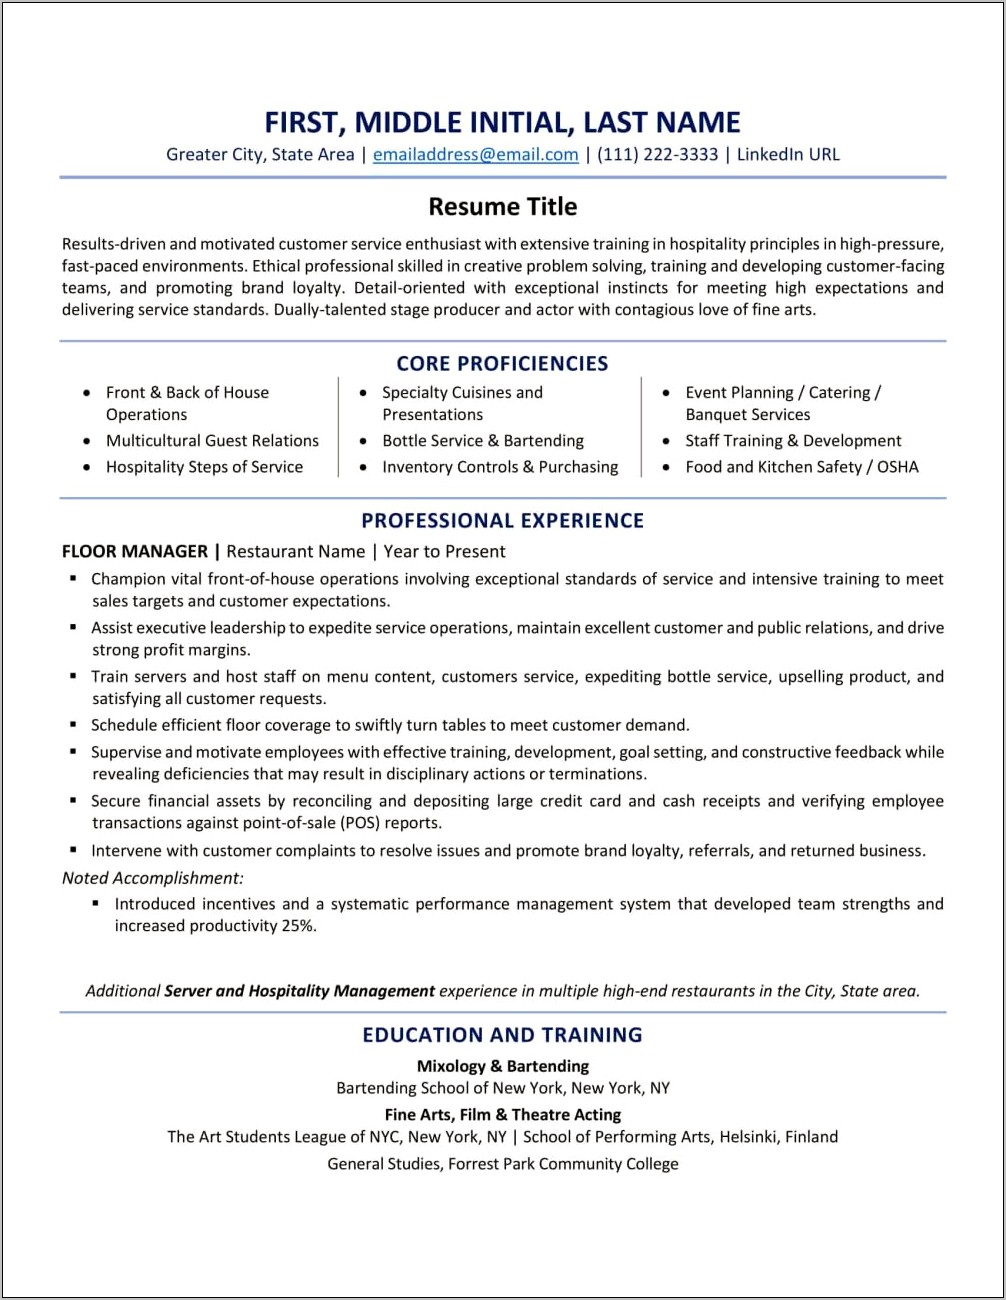 Resume Sample For General Employment